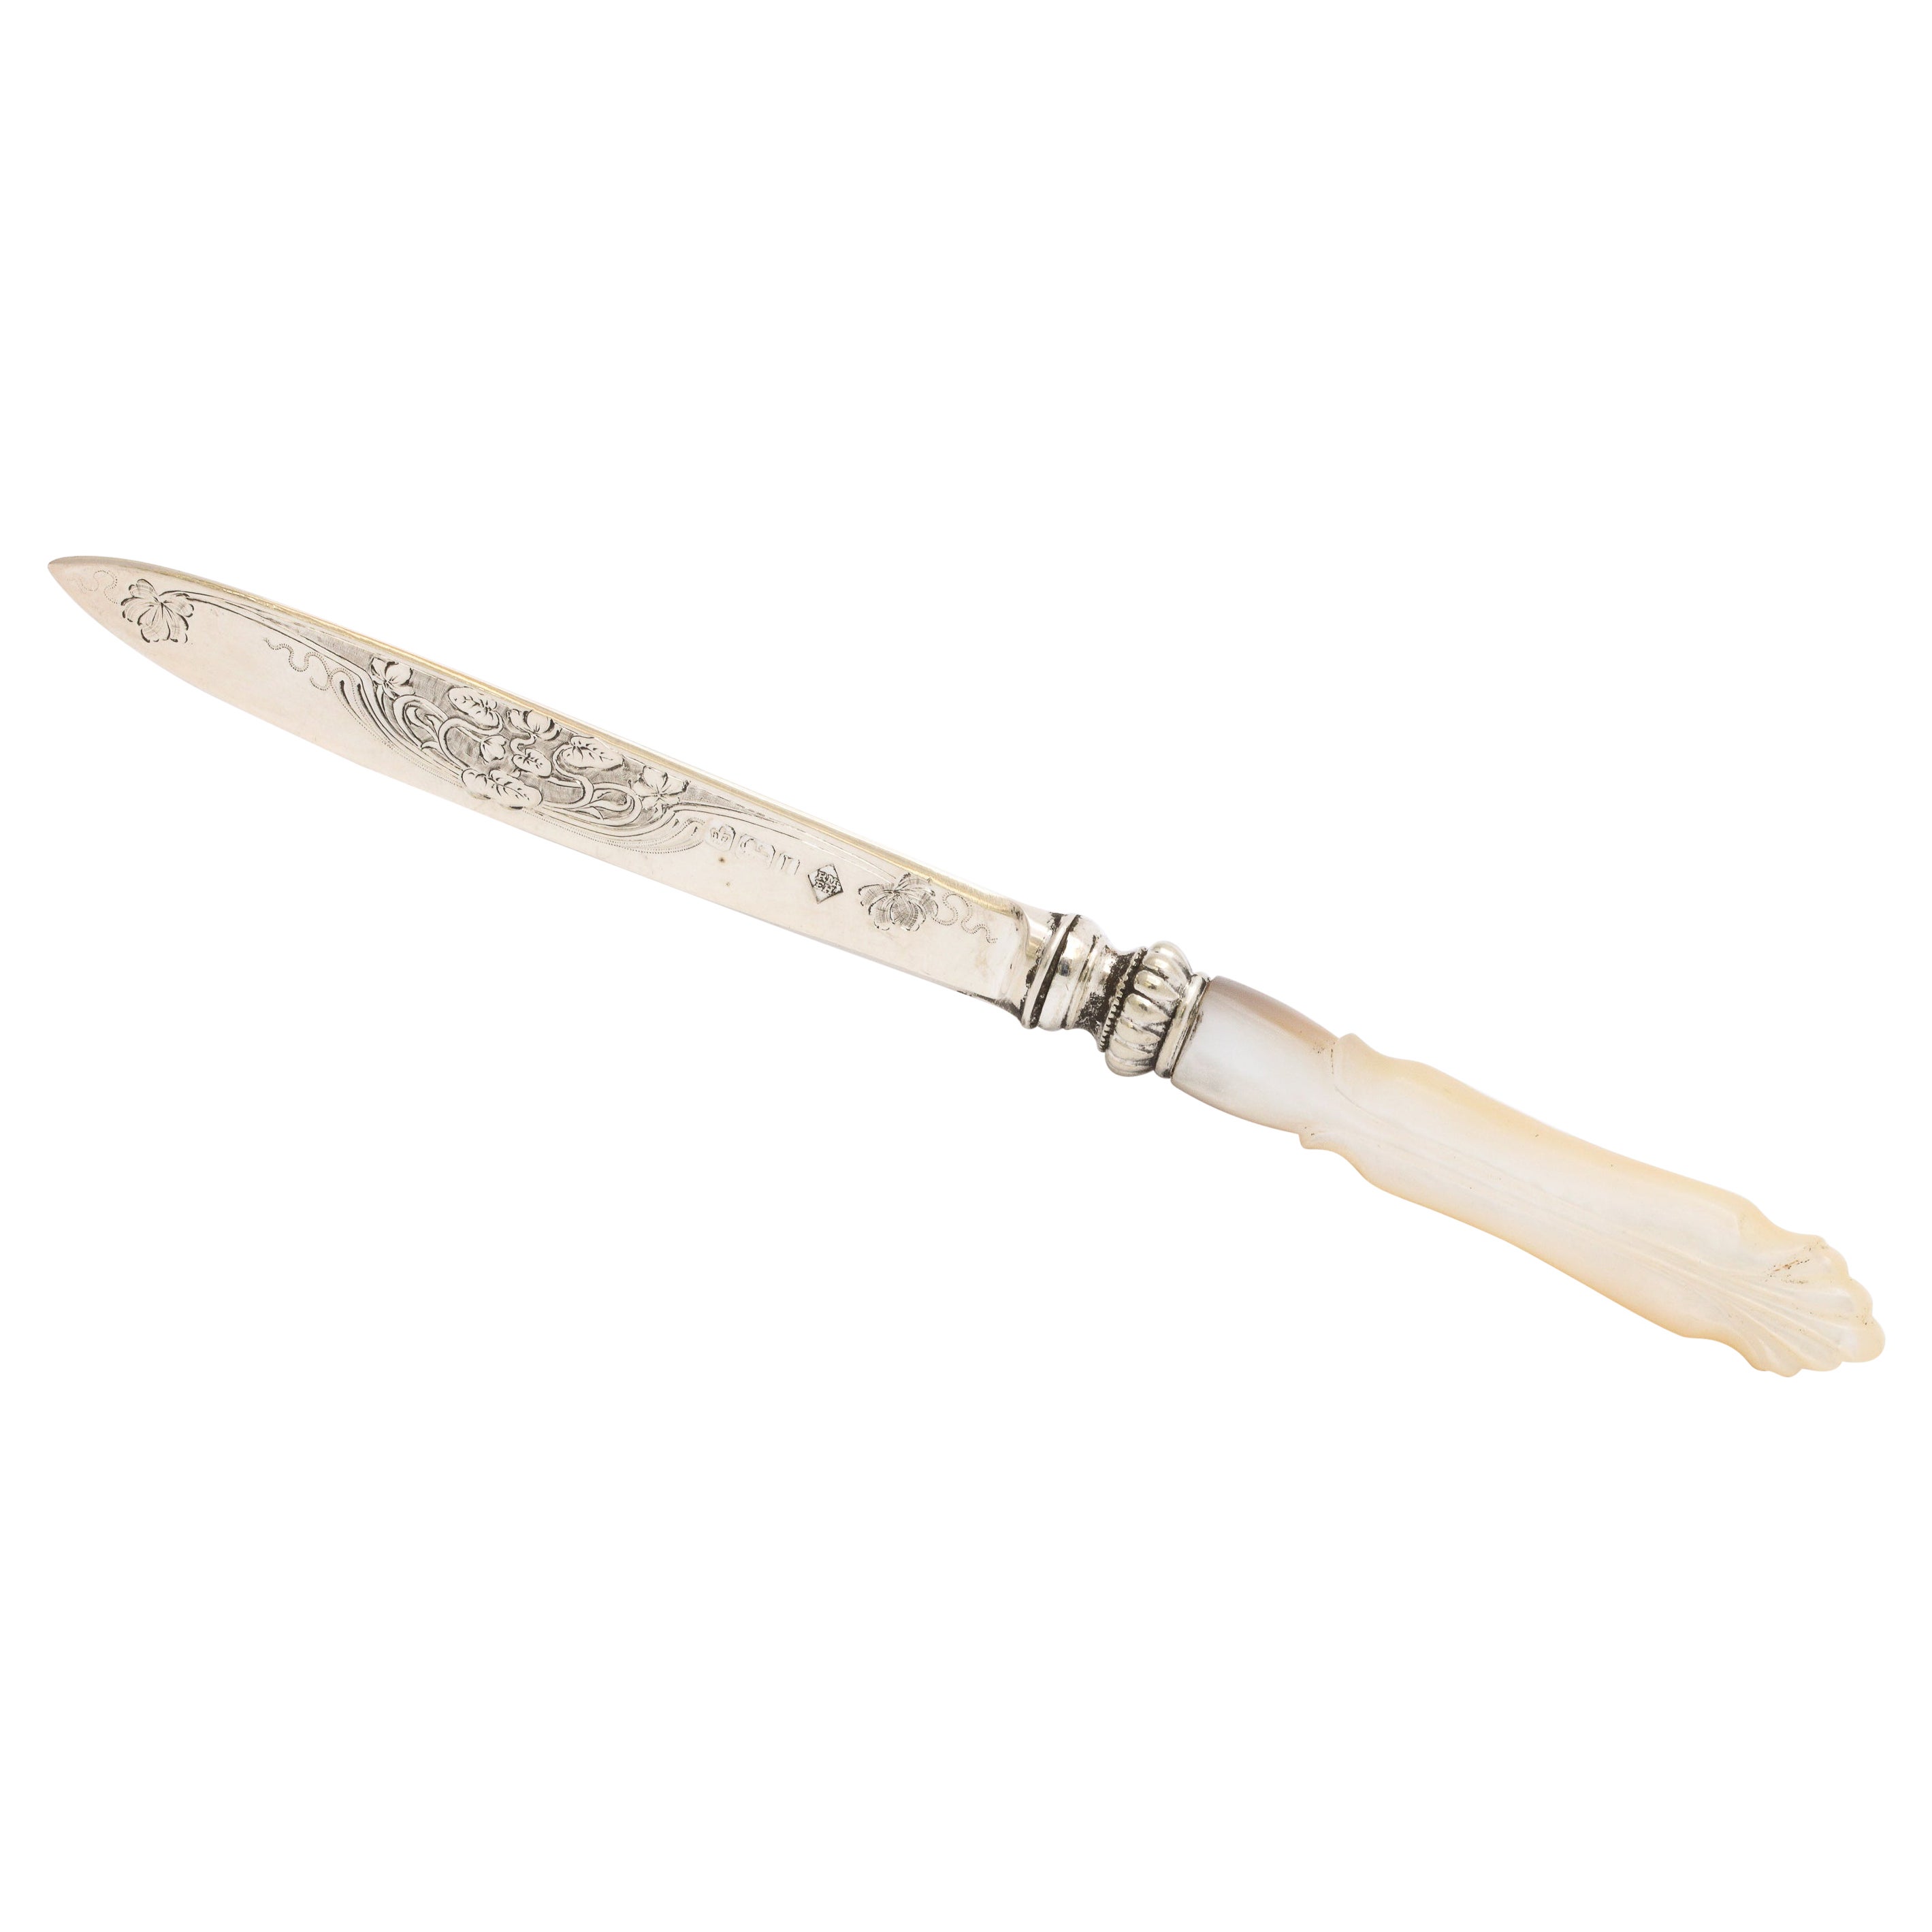 Paper-cut stainless steel double long blade gift box Beautiful letter opener decorated with mother of Pearl design 